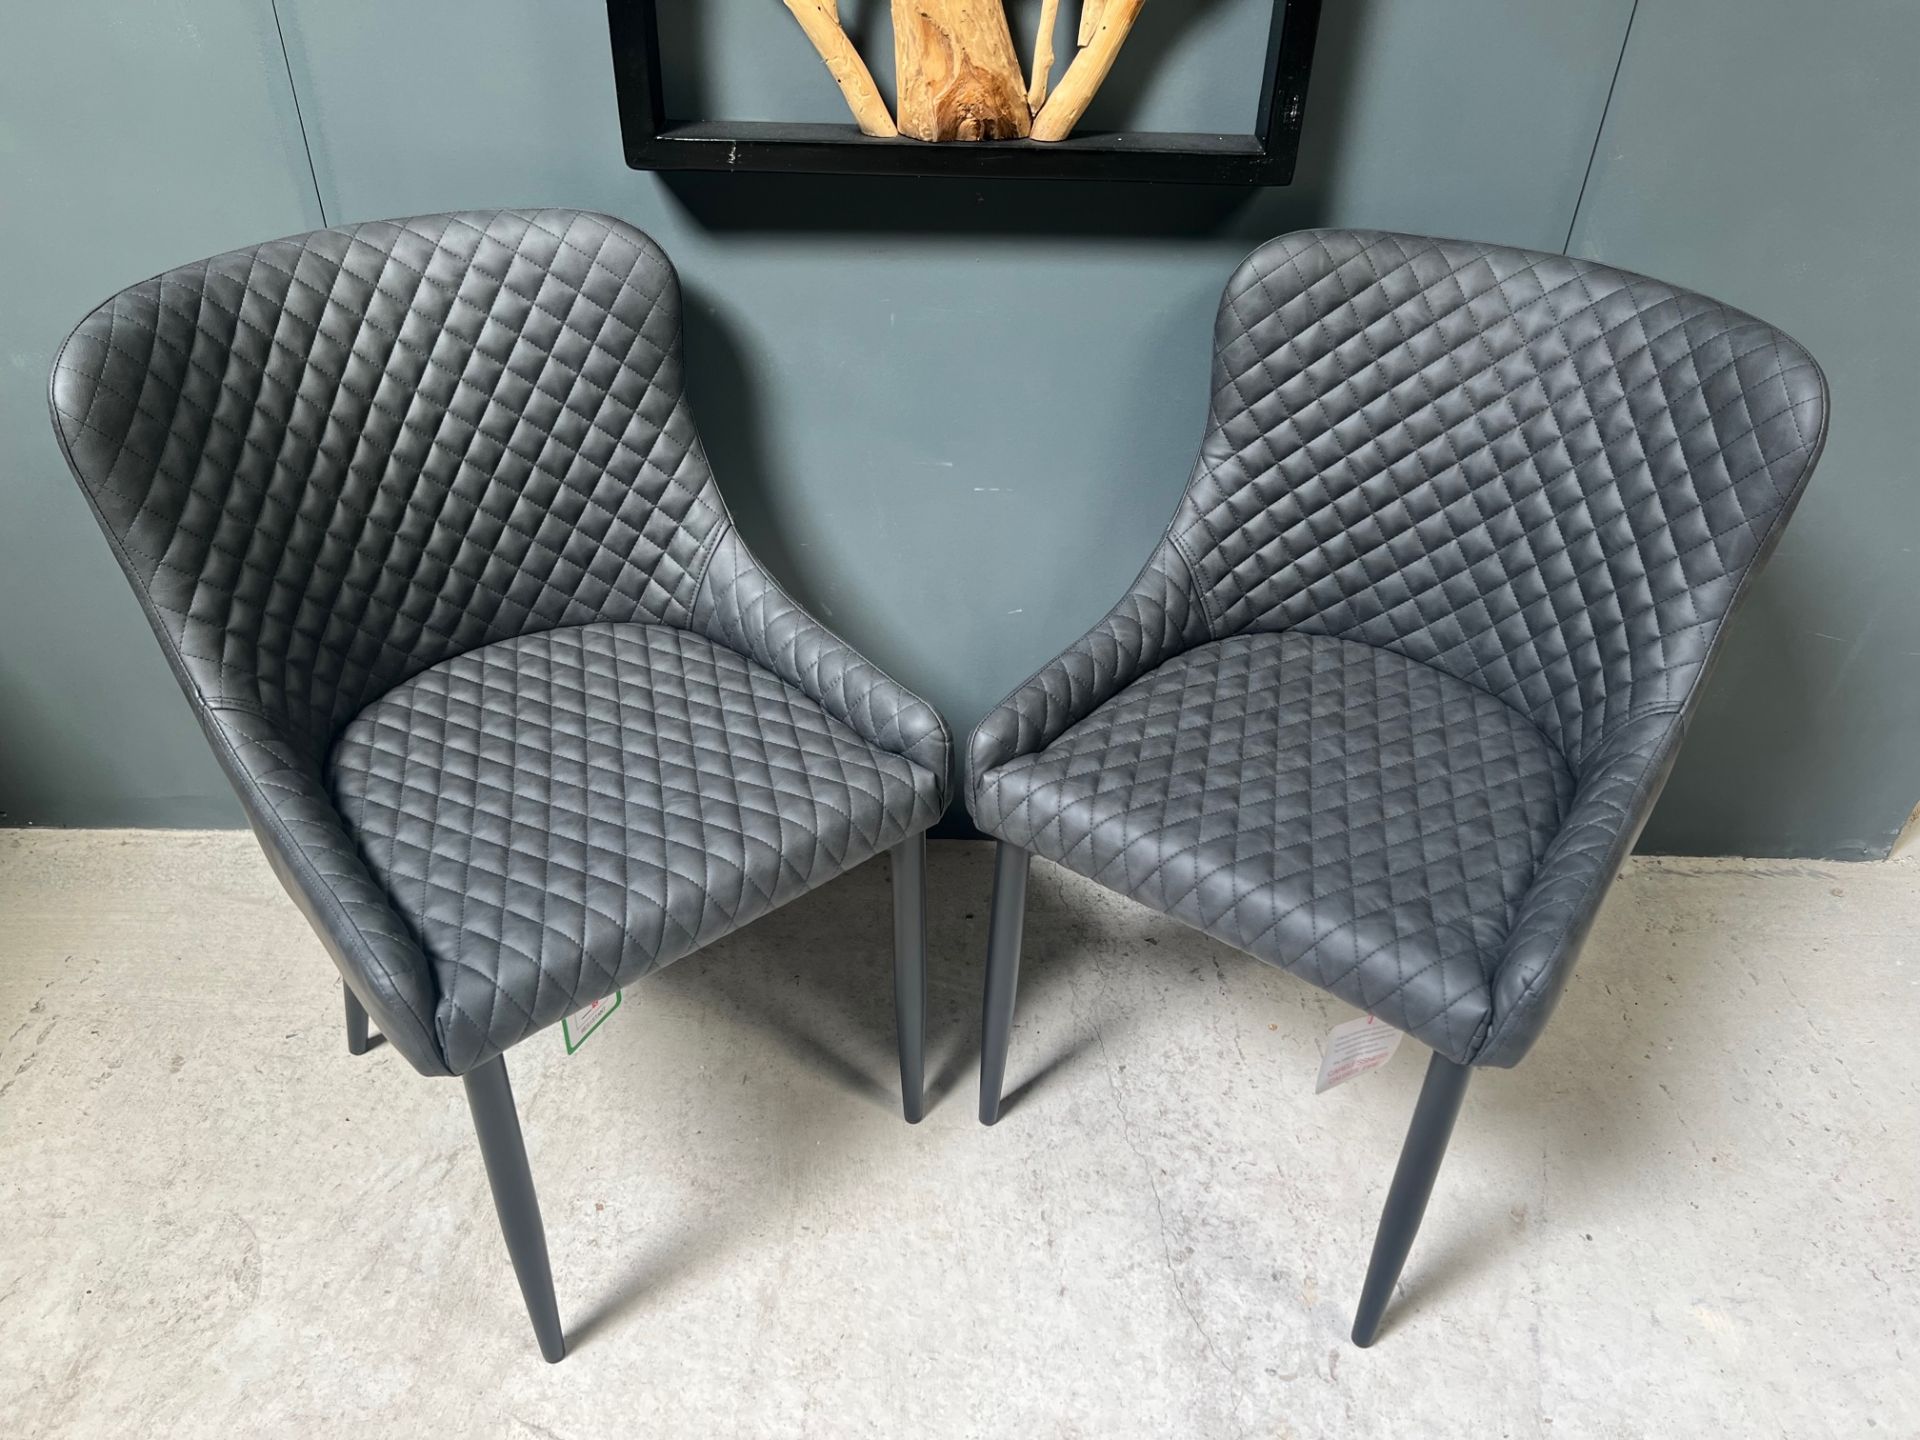 Classic Pu Leather Dining Chairs - Image 2 of 5